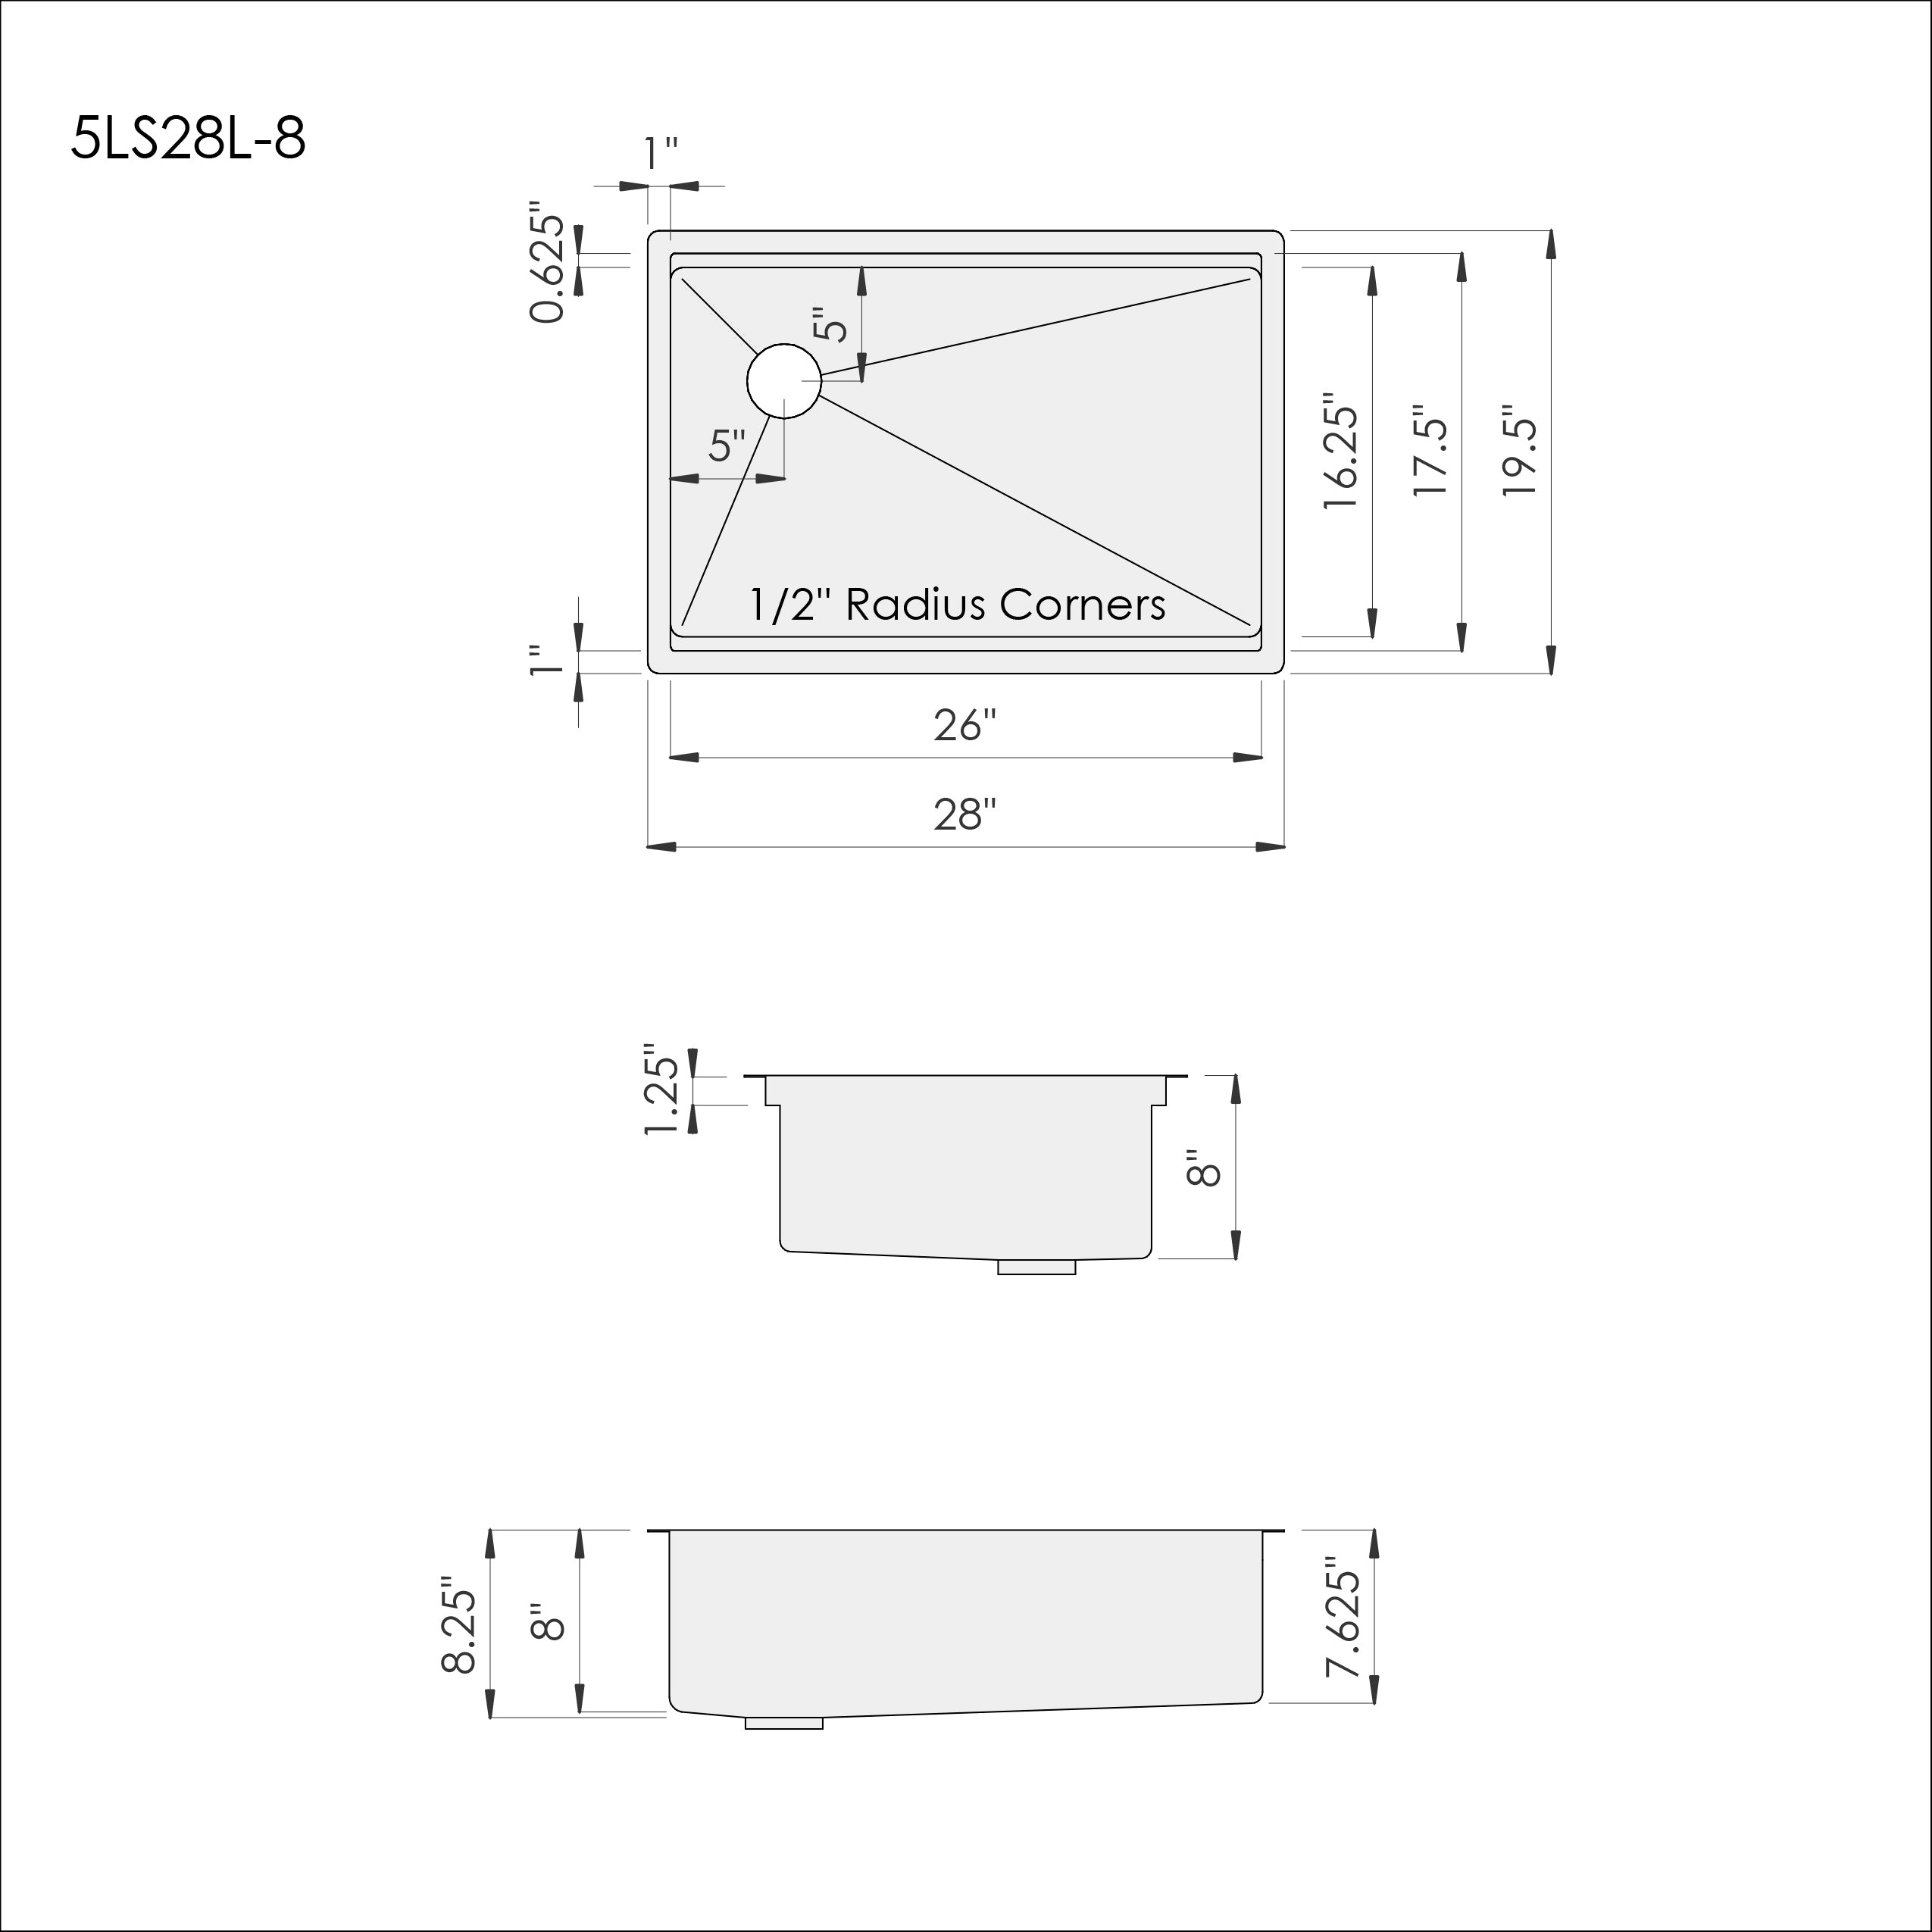 Dimensions for 28 inch stainless steel undermount workstation sink with drain offset to the left. Features Create Good Sinks' patented seamless drain.